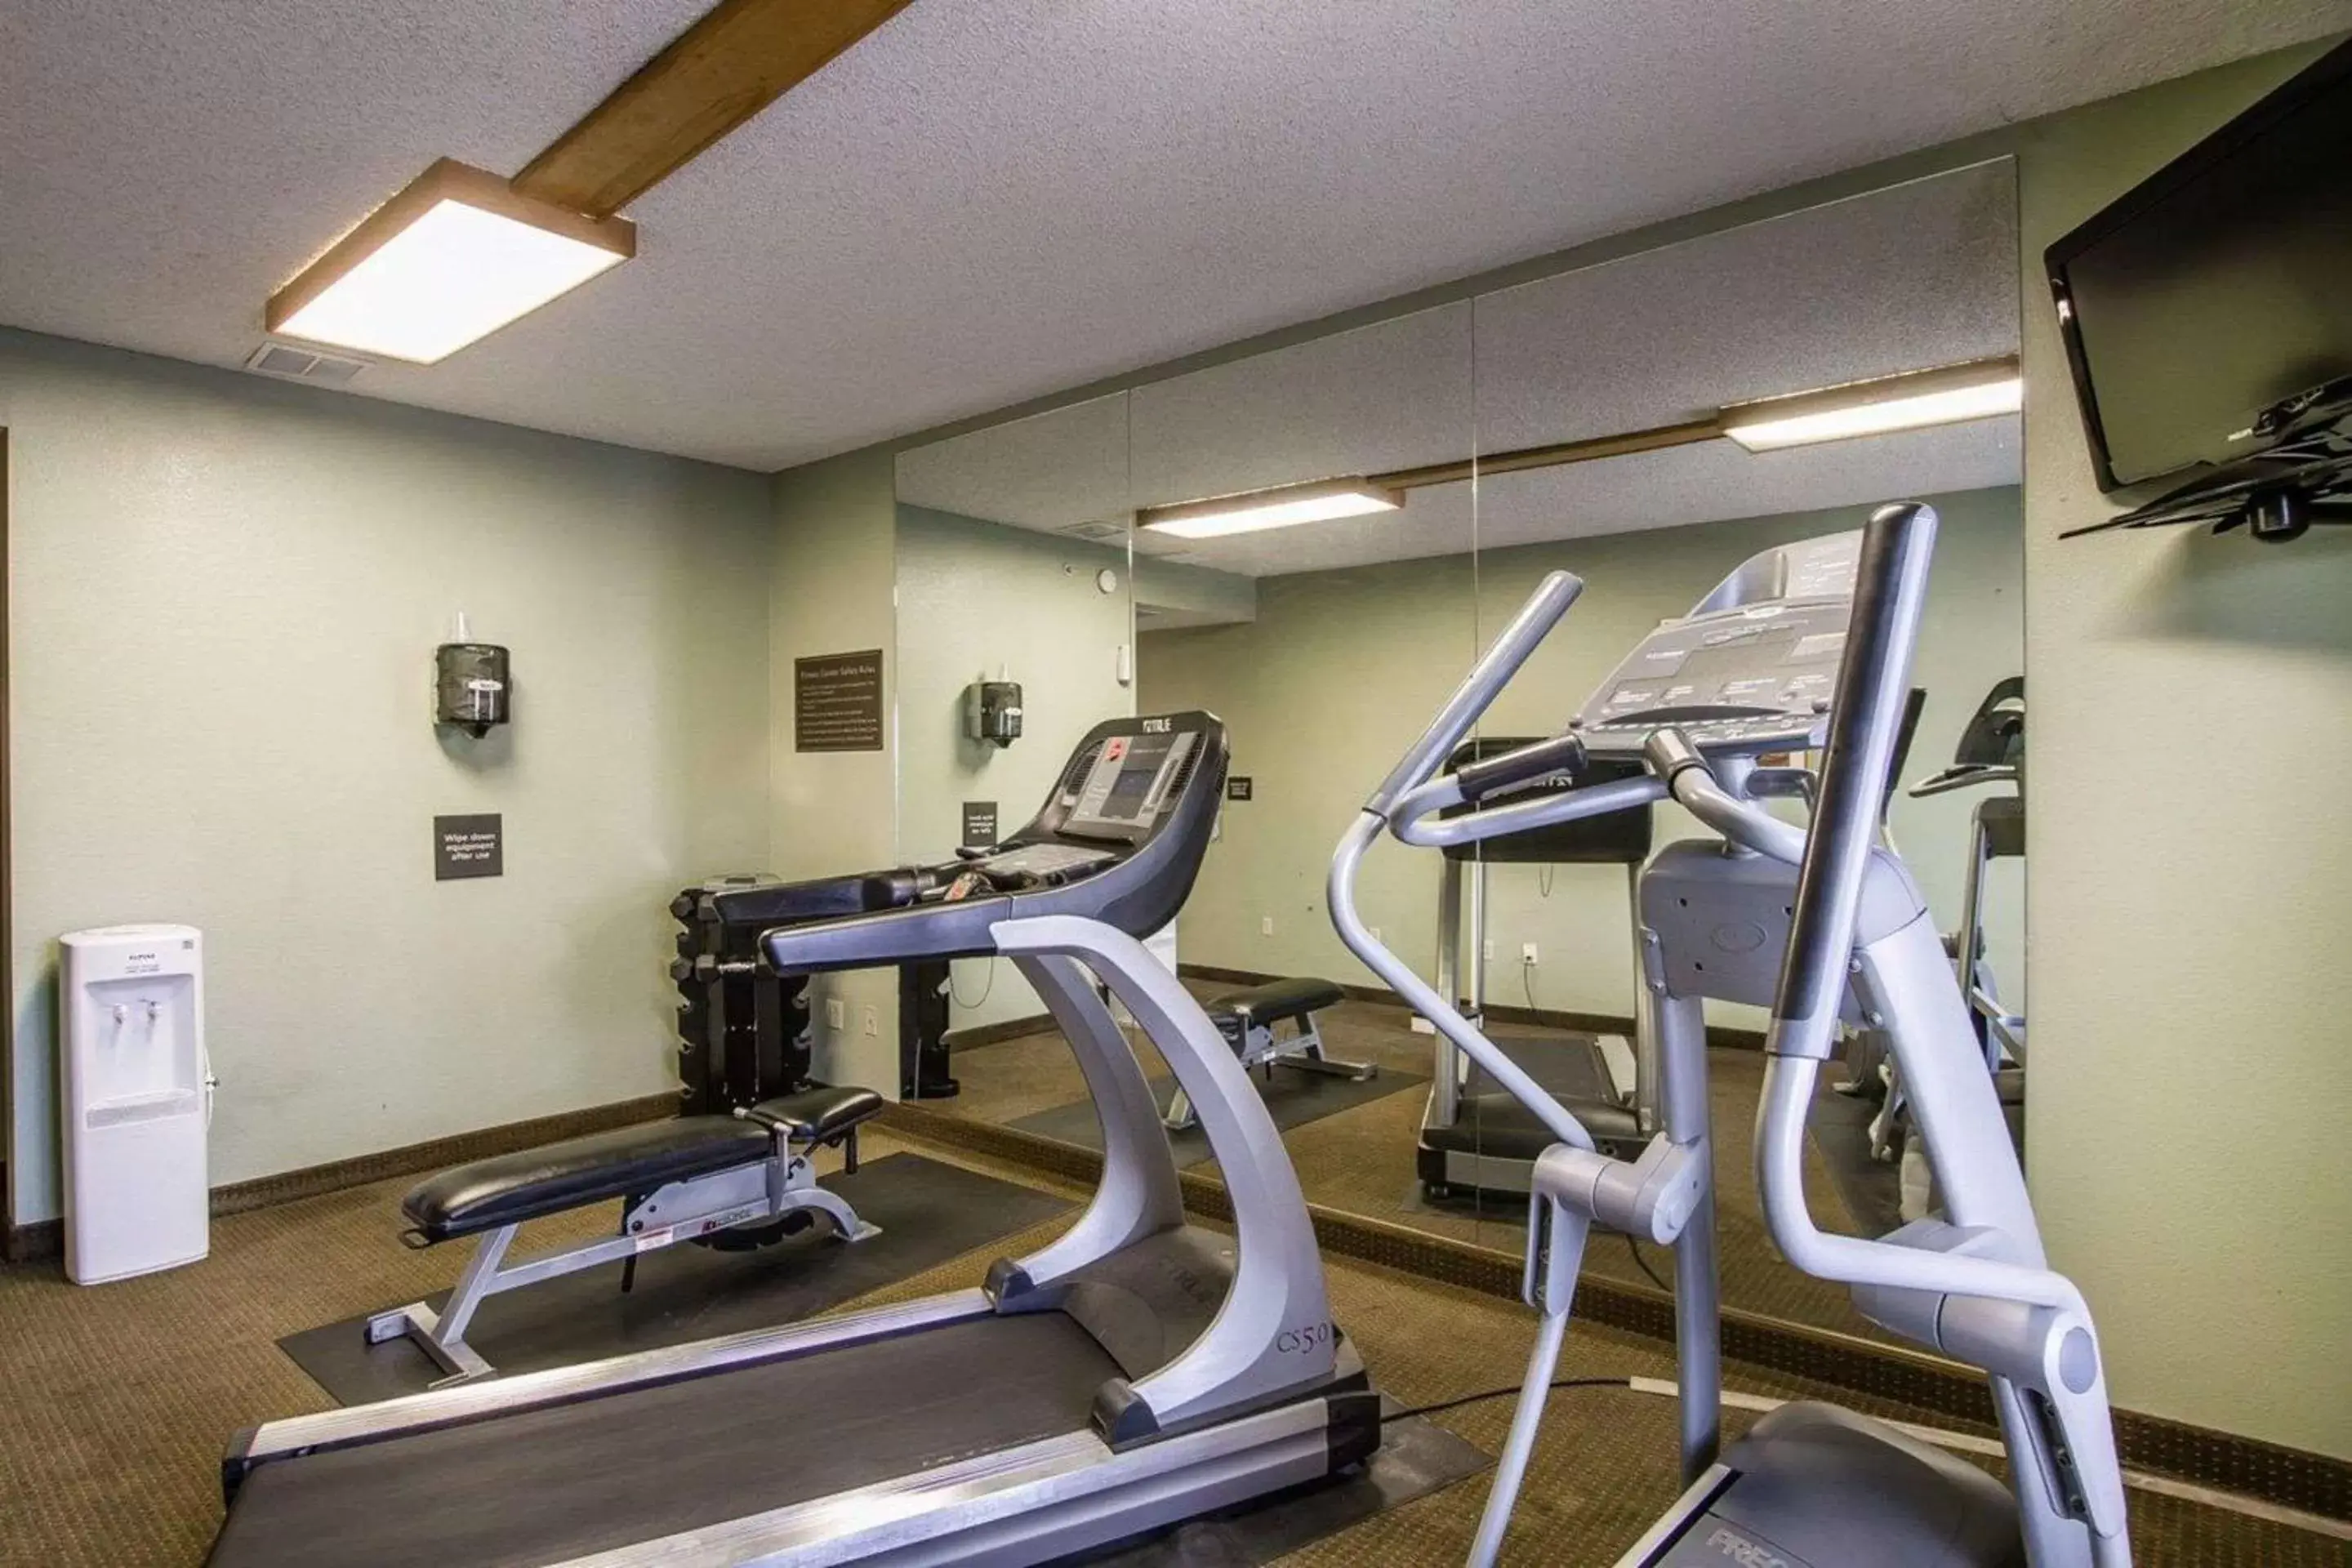 Fitness centre/facilities, Fitness Center/Facilities in Comfort Inn I-10 West at 51st Ave